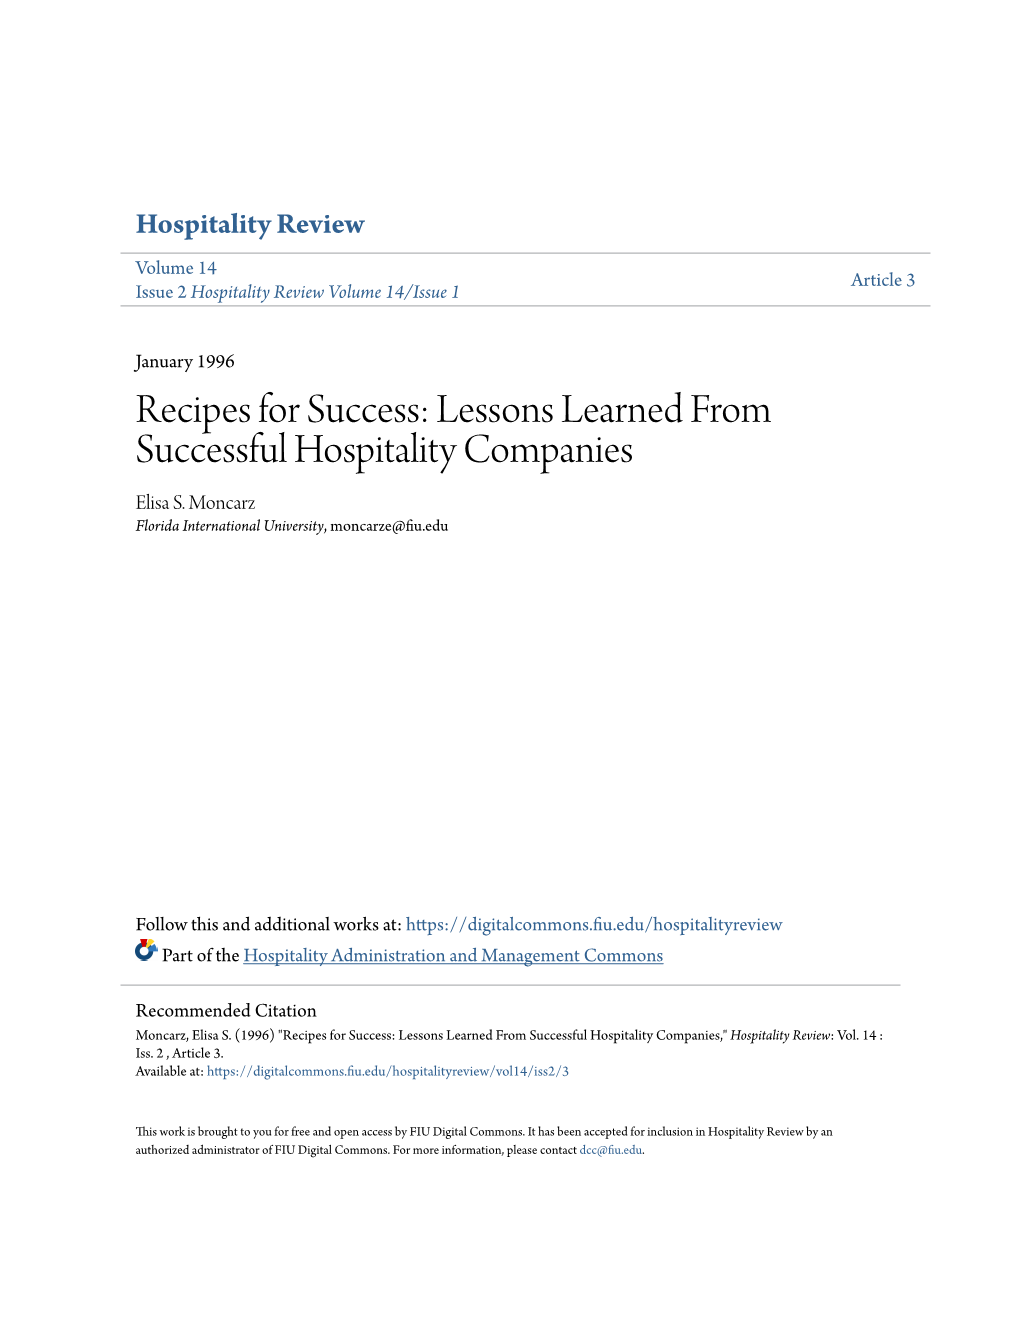 Lessons Learned from Successful Hospitality Companies Elisa S